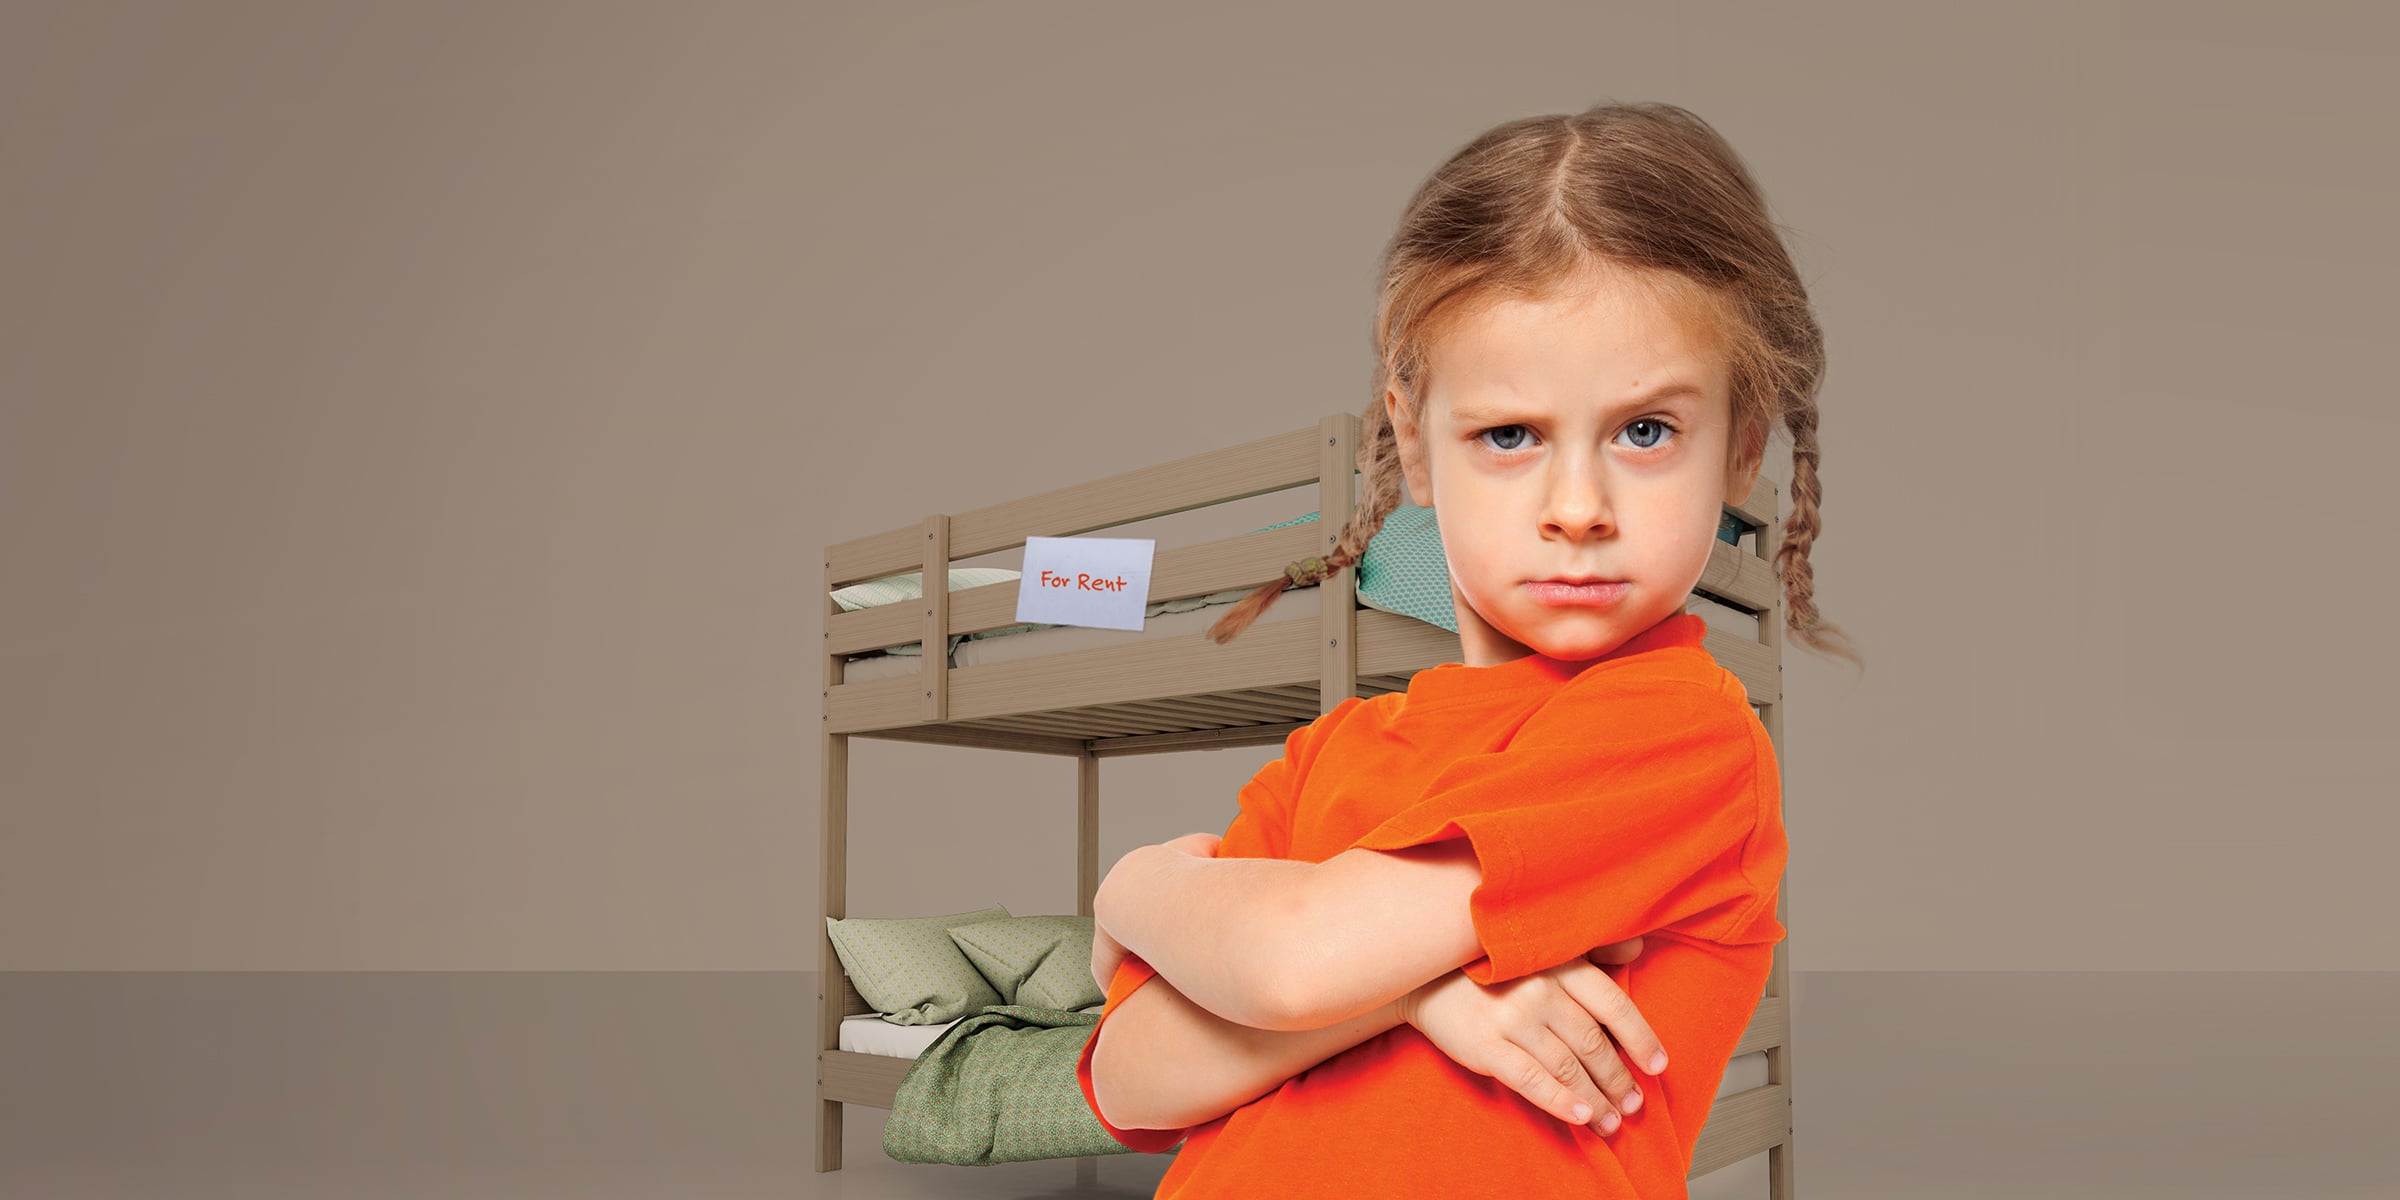 Child with braided pigtails in orange shirt crosses her arms in front of a brown bunkbed with a 